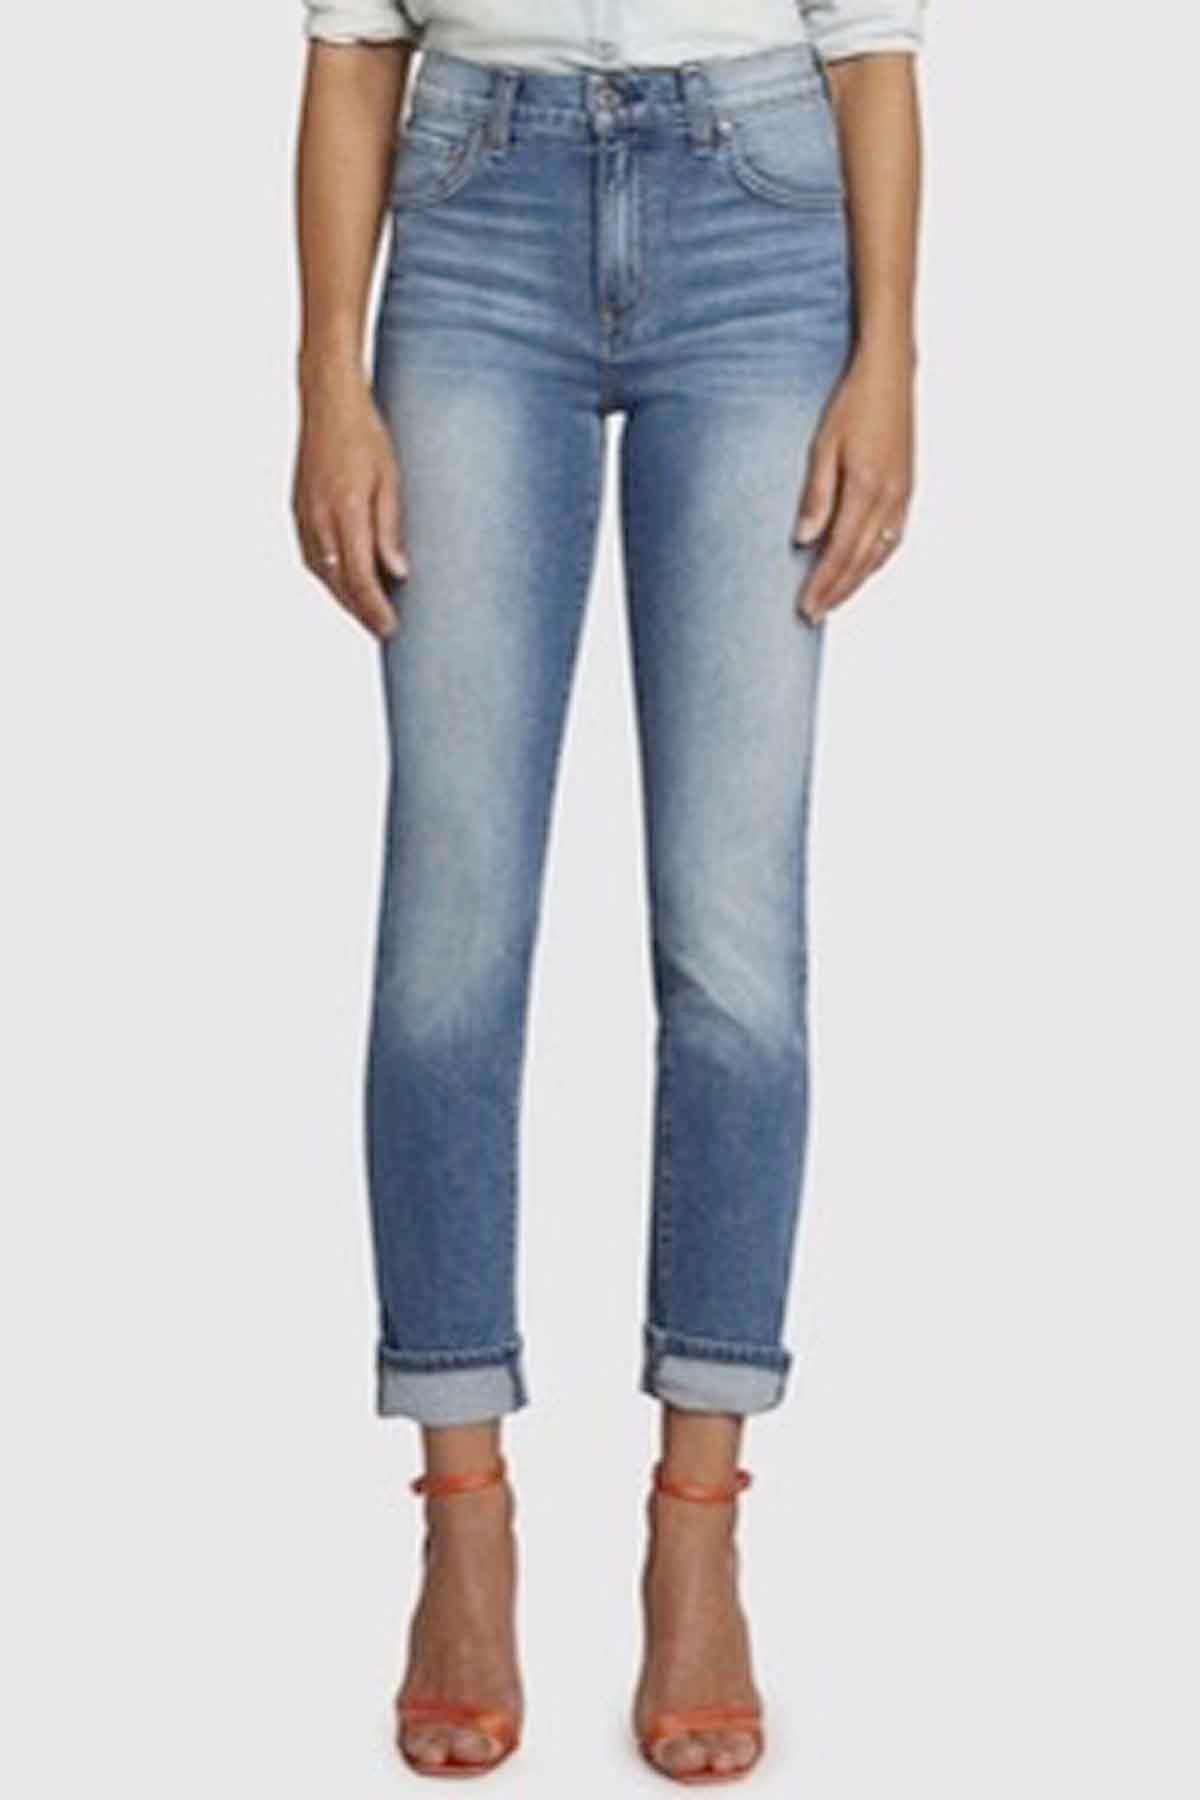 Mamma Mia High Rise Straight Leg Jean in the Now or Never light Wash by Principle Denim